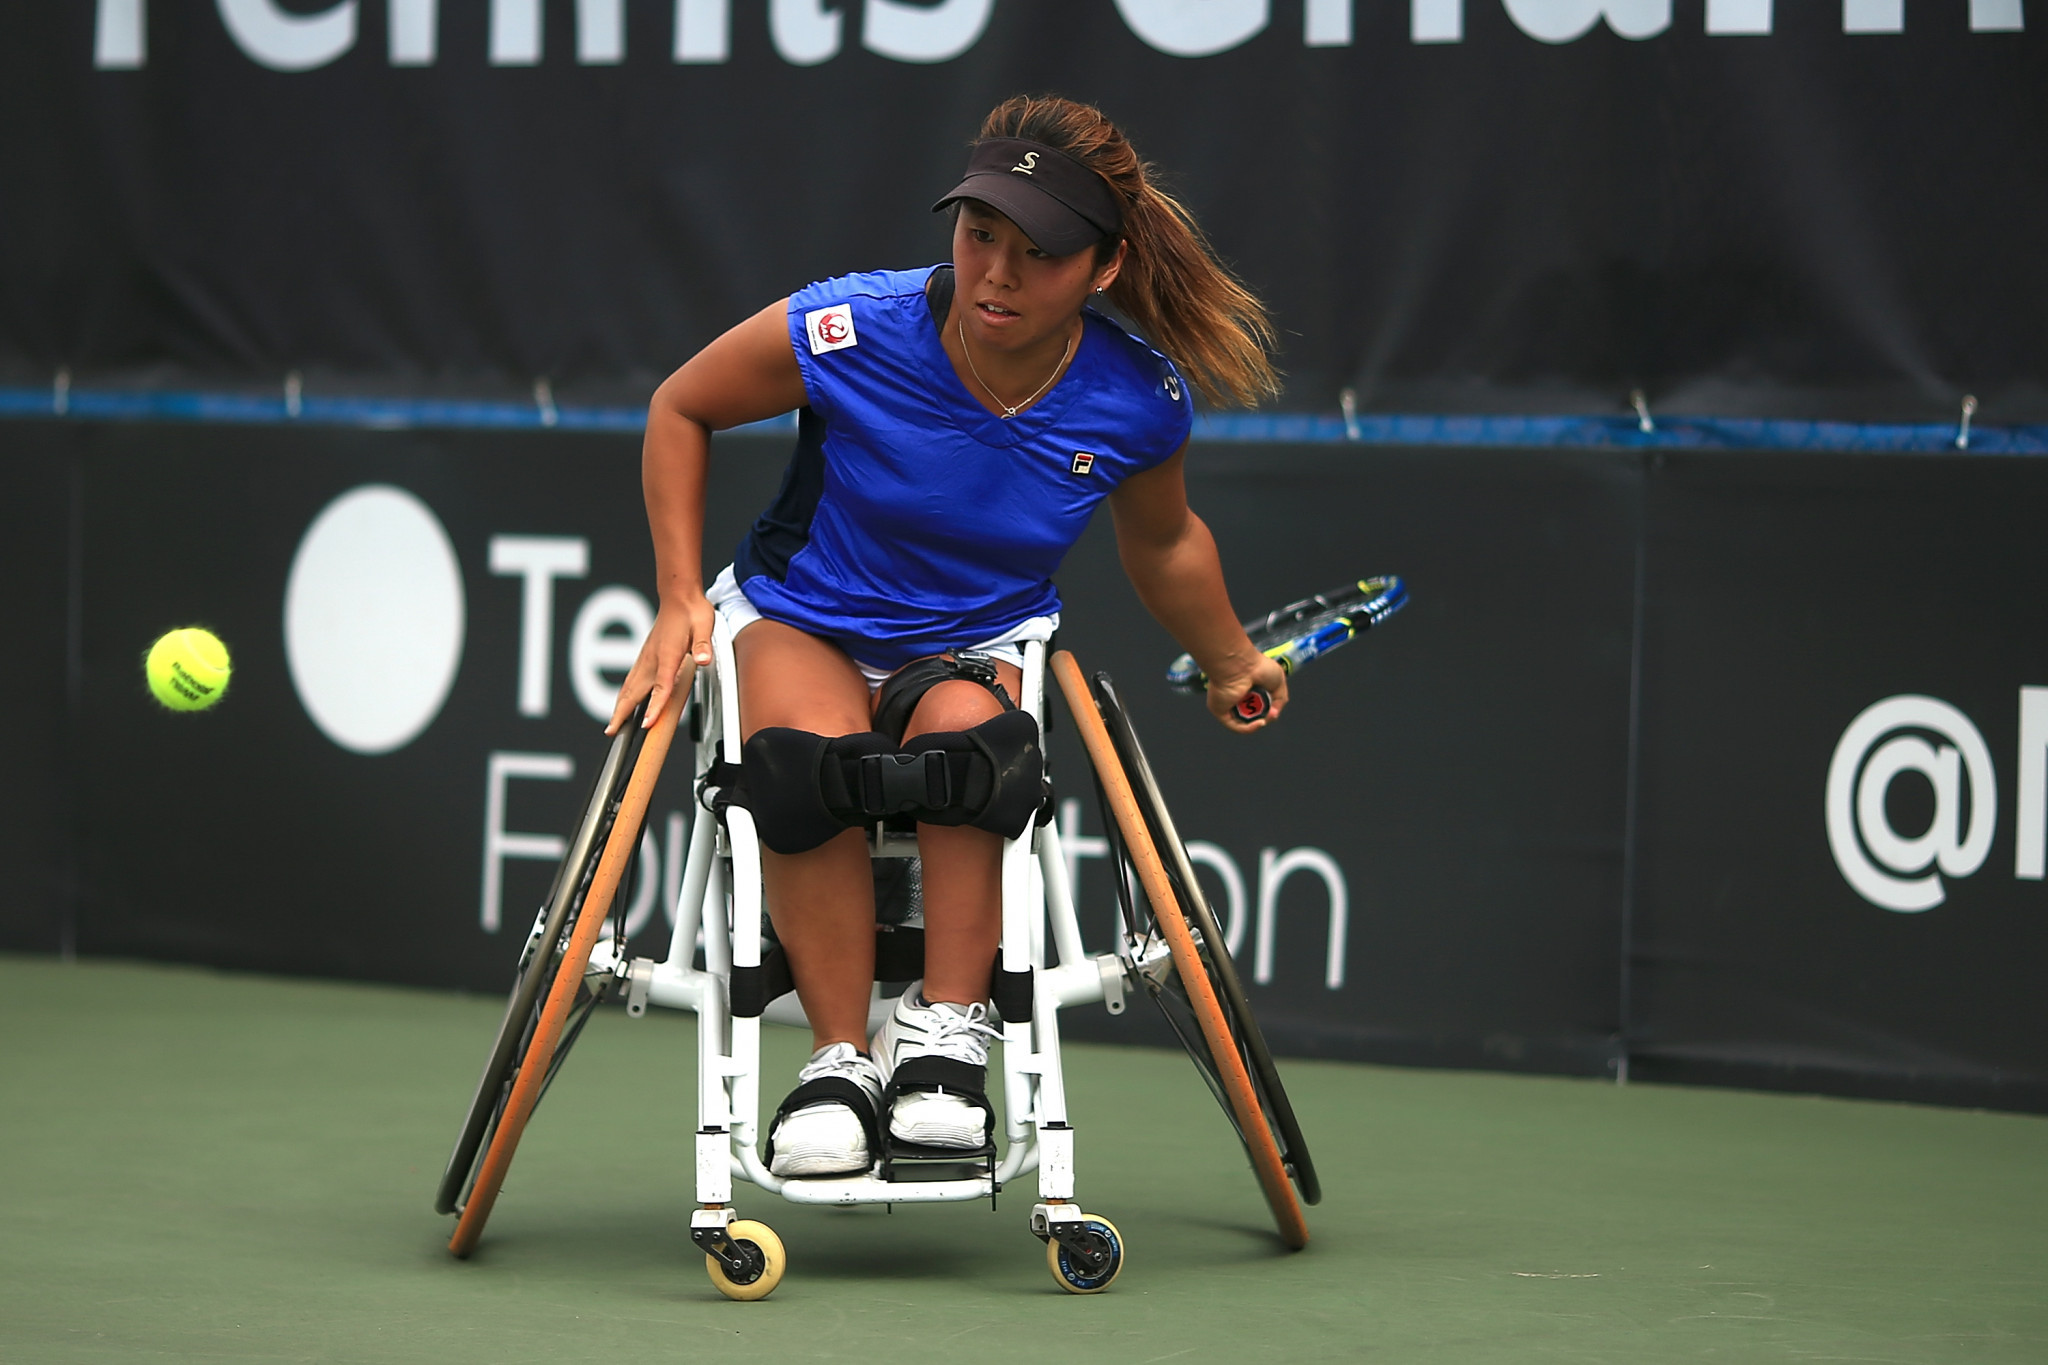 Japan's Yui Kamiji is among the leading names set to compete in the women's singles event ©Getty Images